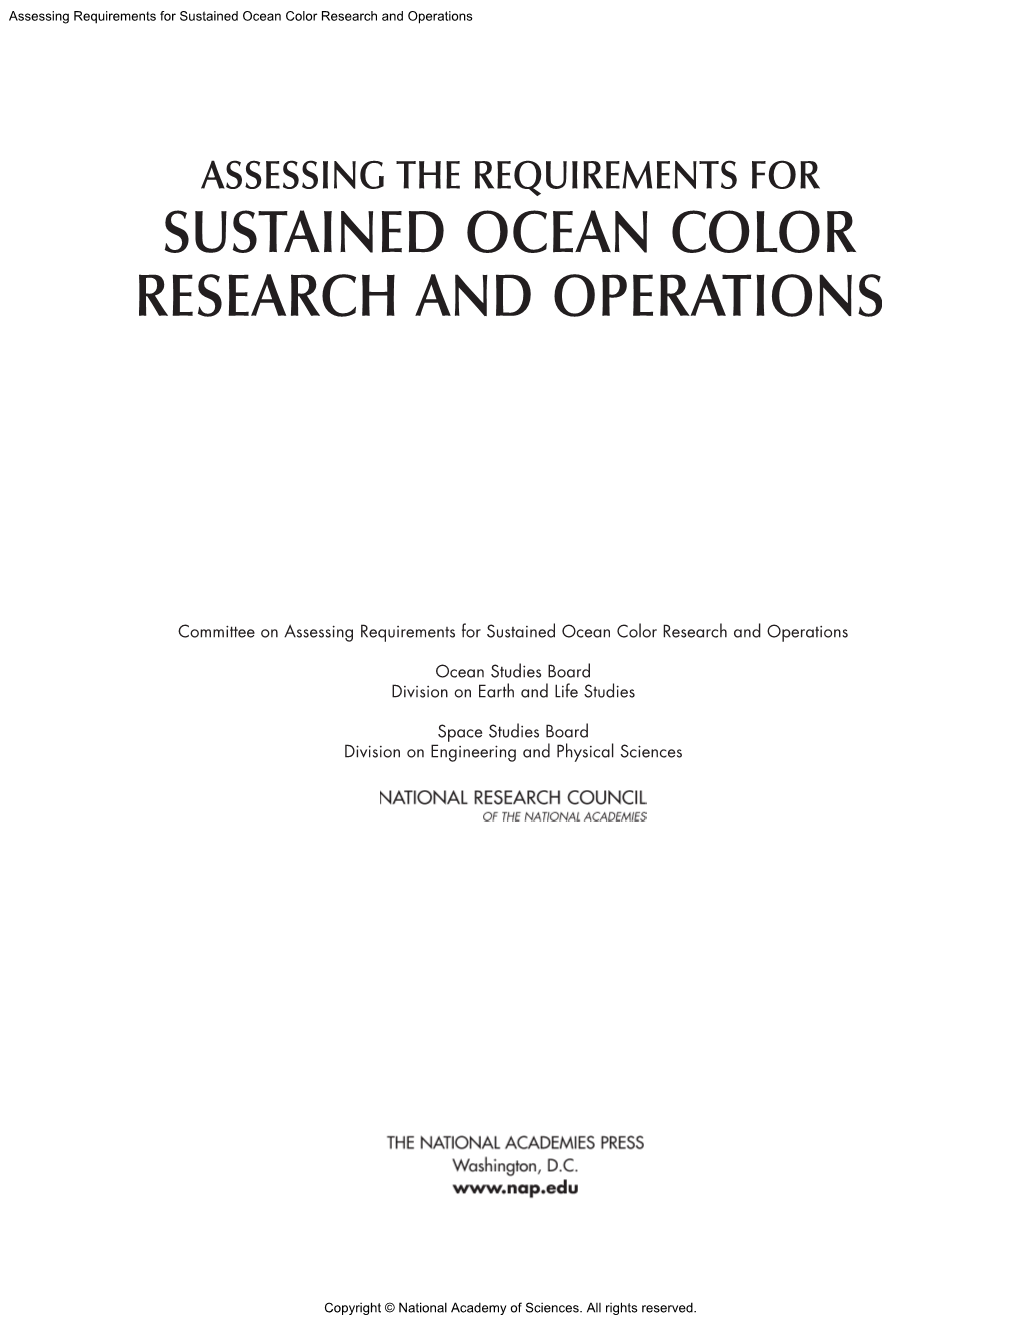 Requirements for Sustained Ocean Color Research and Operations